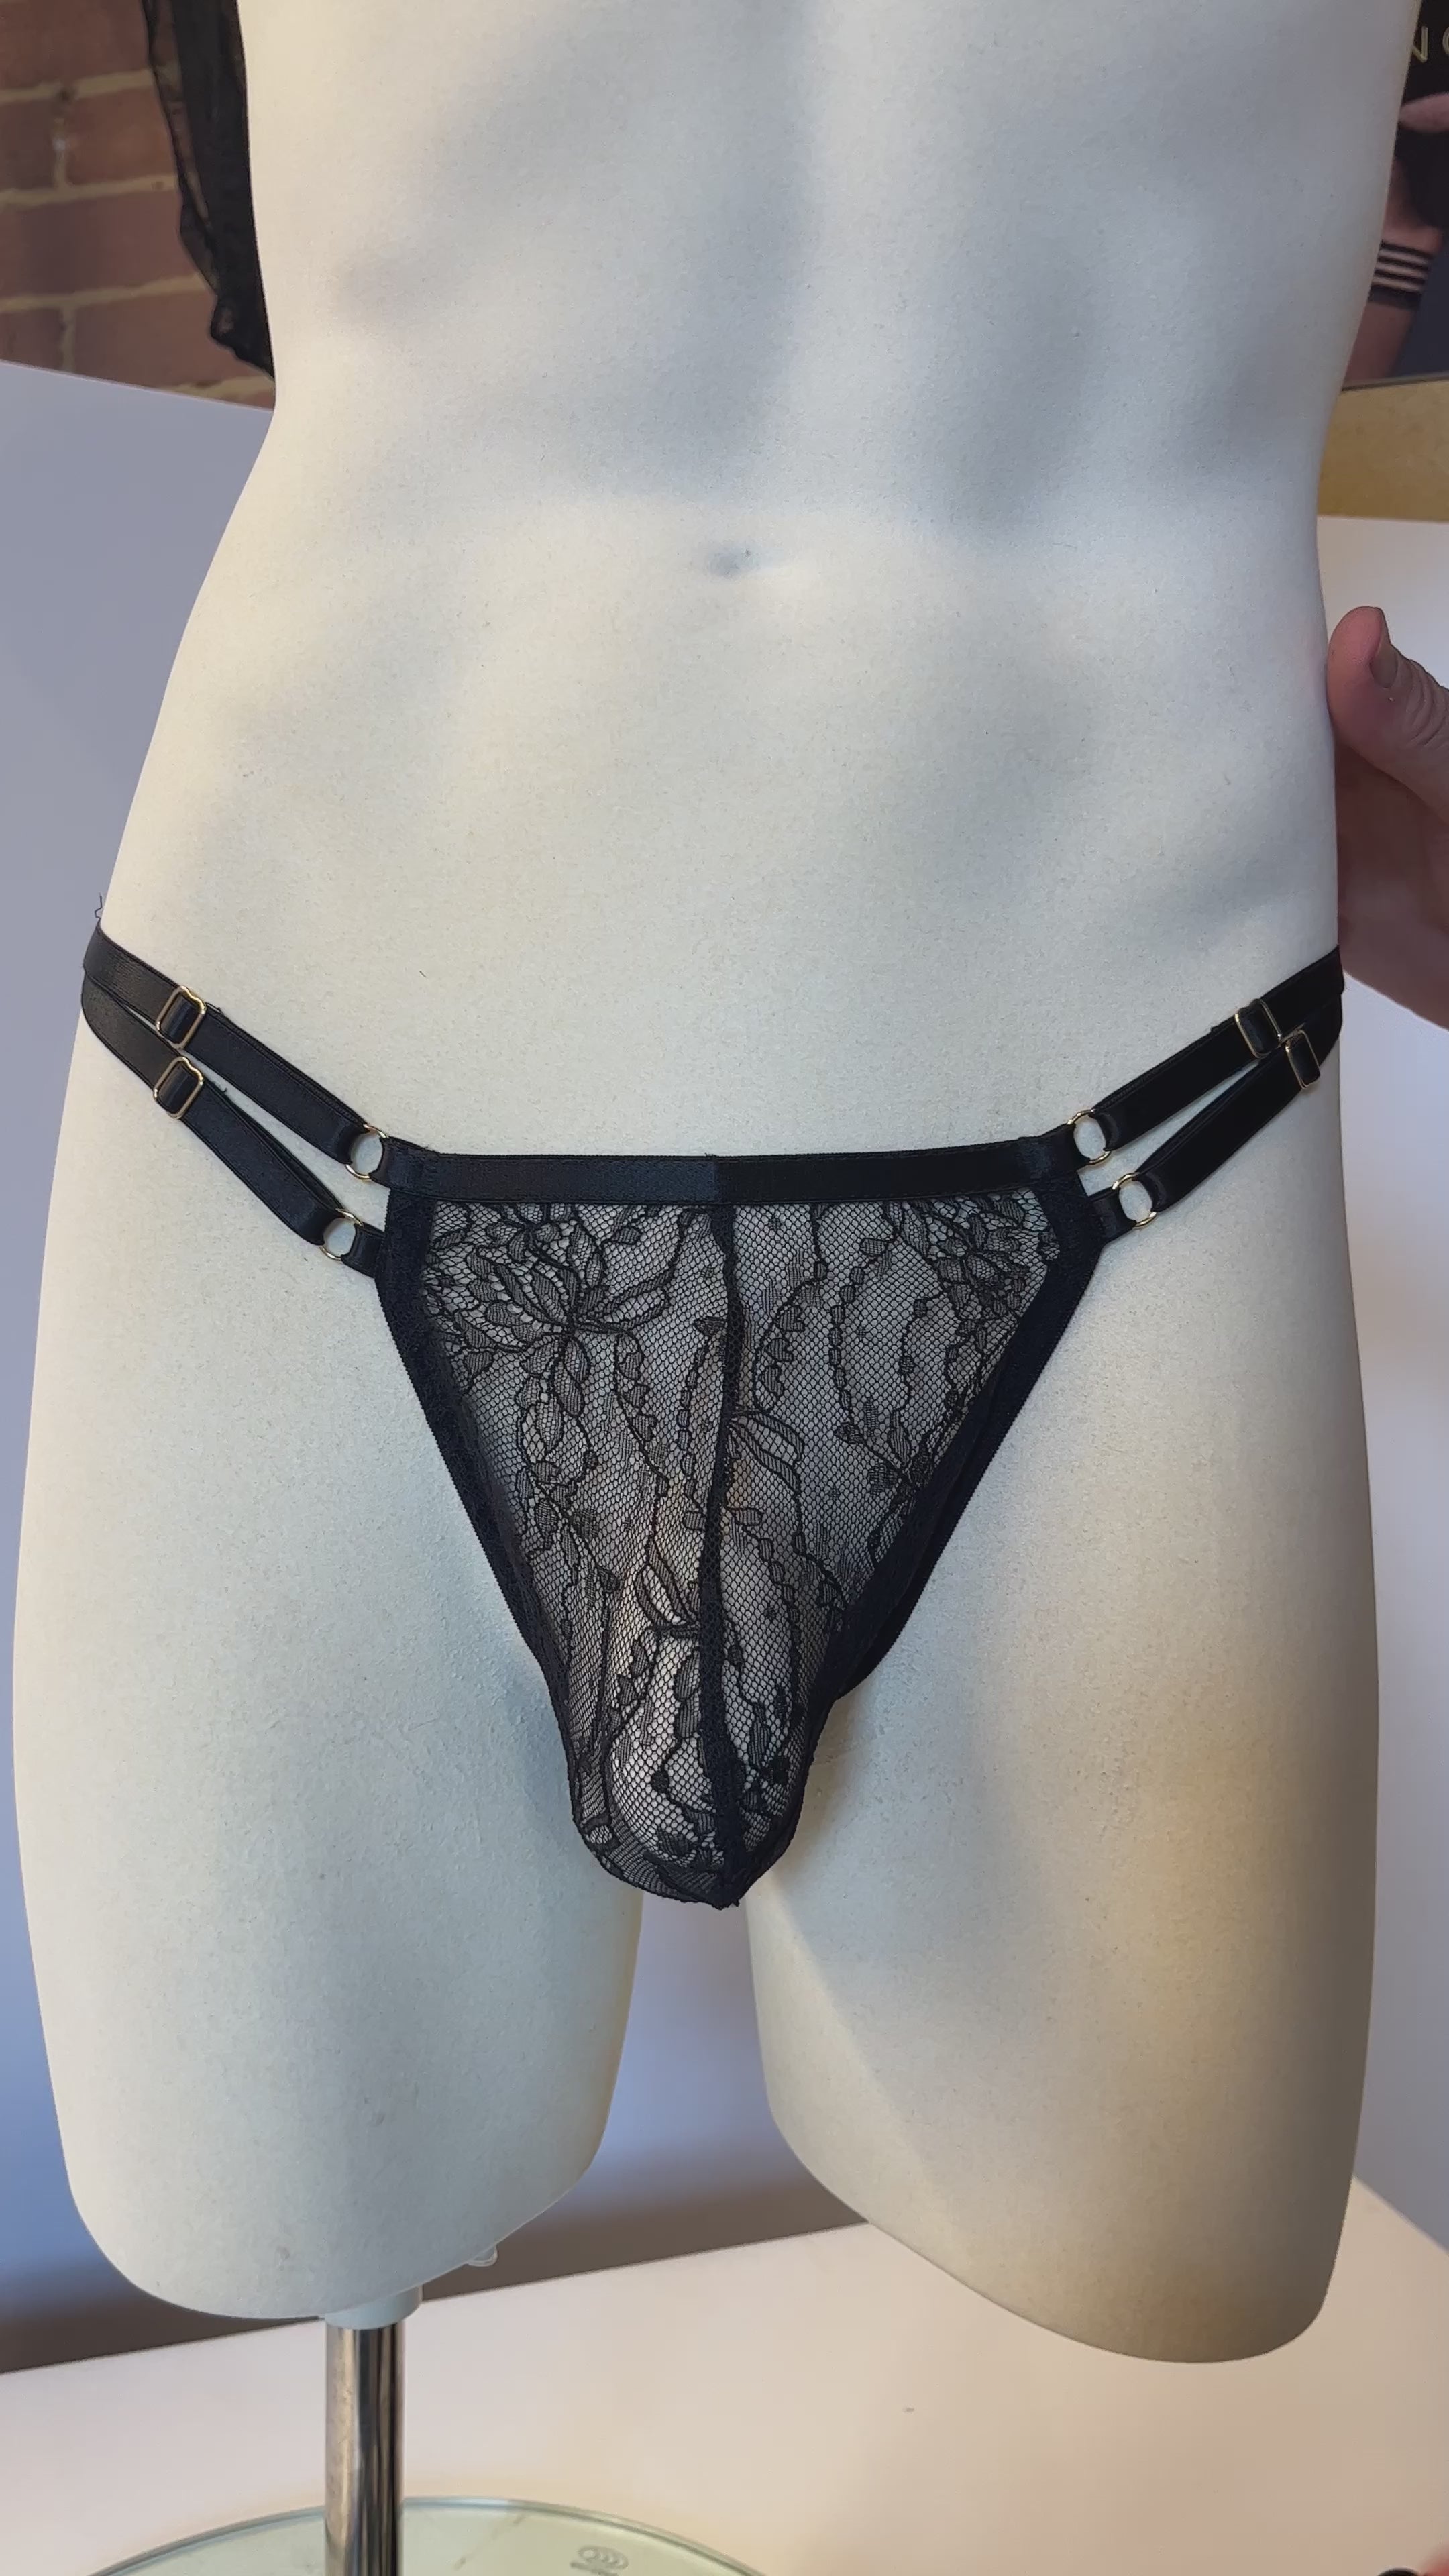 Jules describes the lacy black ouvert knickers for men by Moot Lingerie